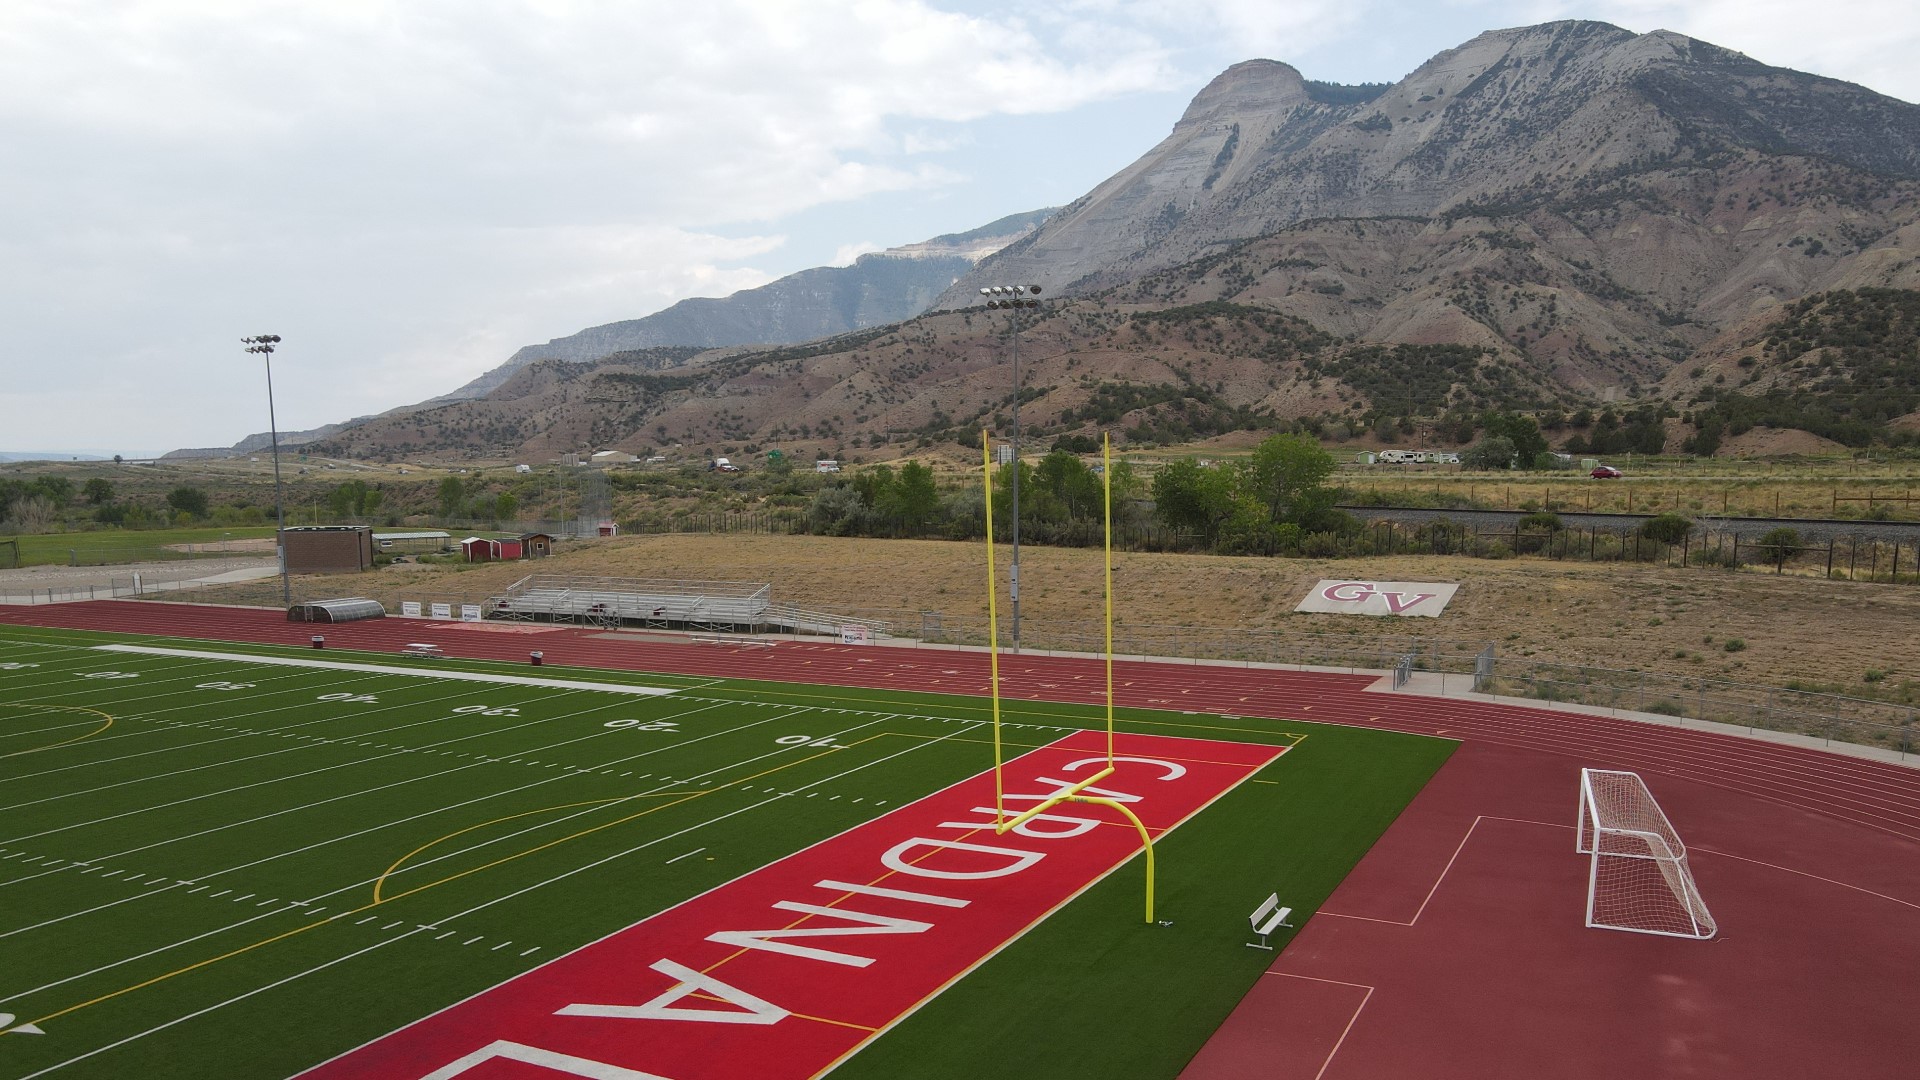 The Cardinals have a scenic home out on Colorado's Western Slope.